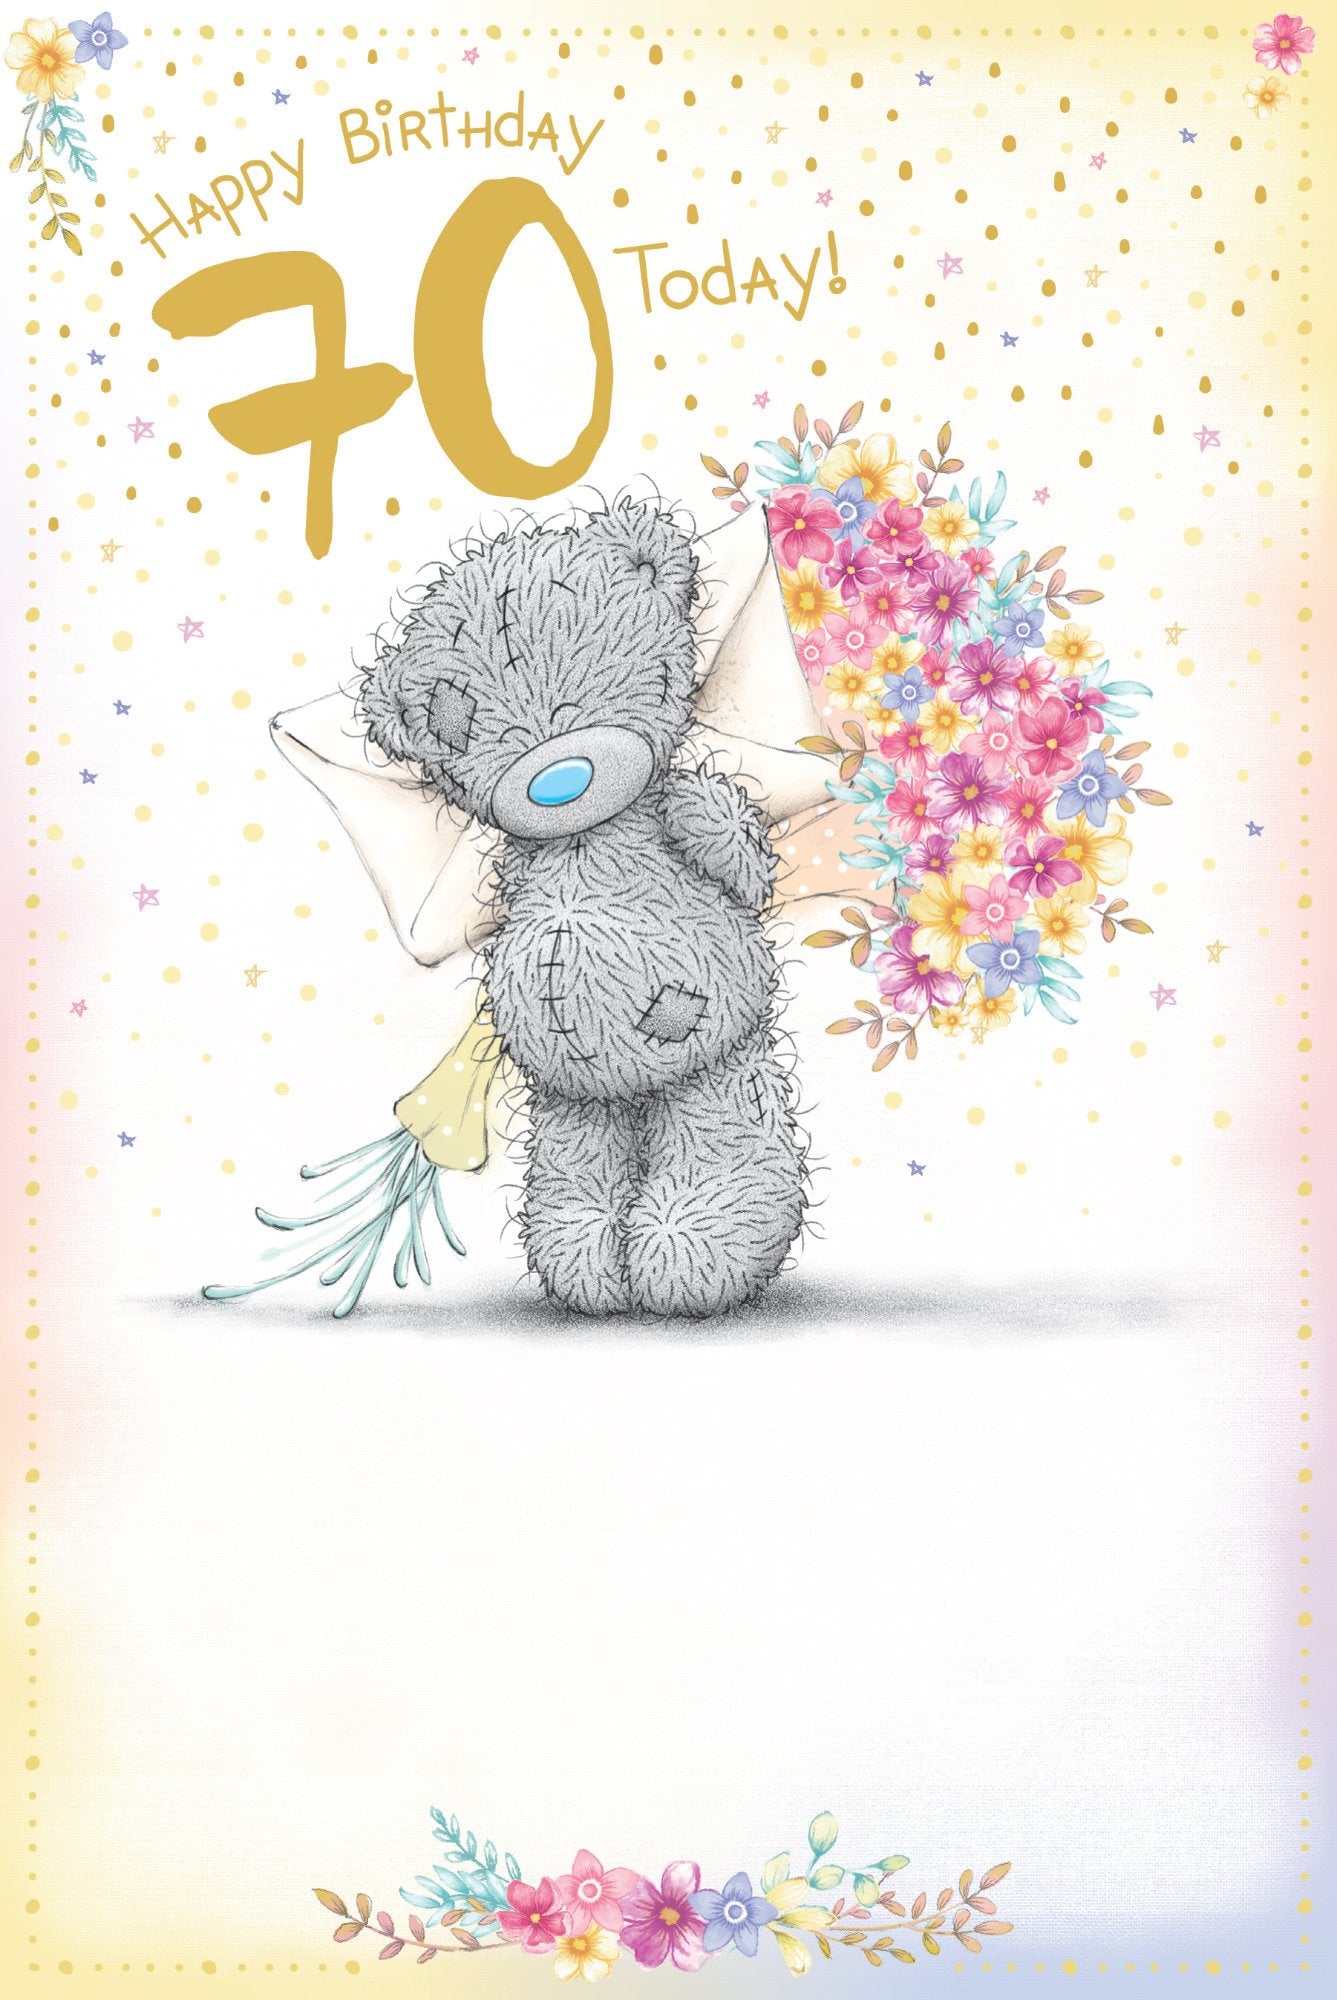 Photograph of 70th Birthday Teddy Bouquet Greetings Card at Nicole's Shop